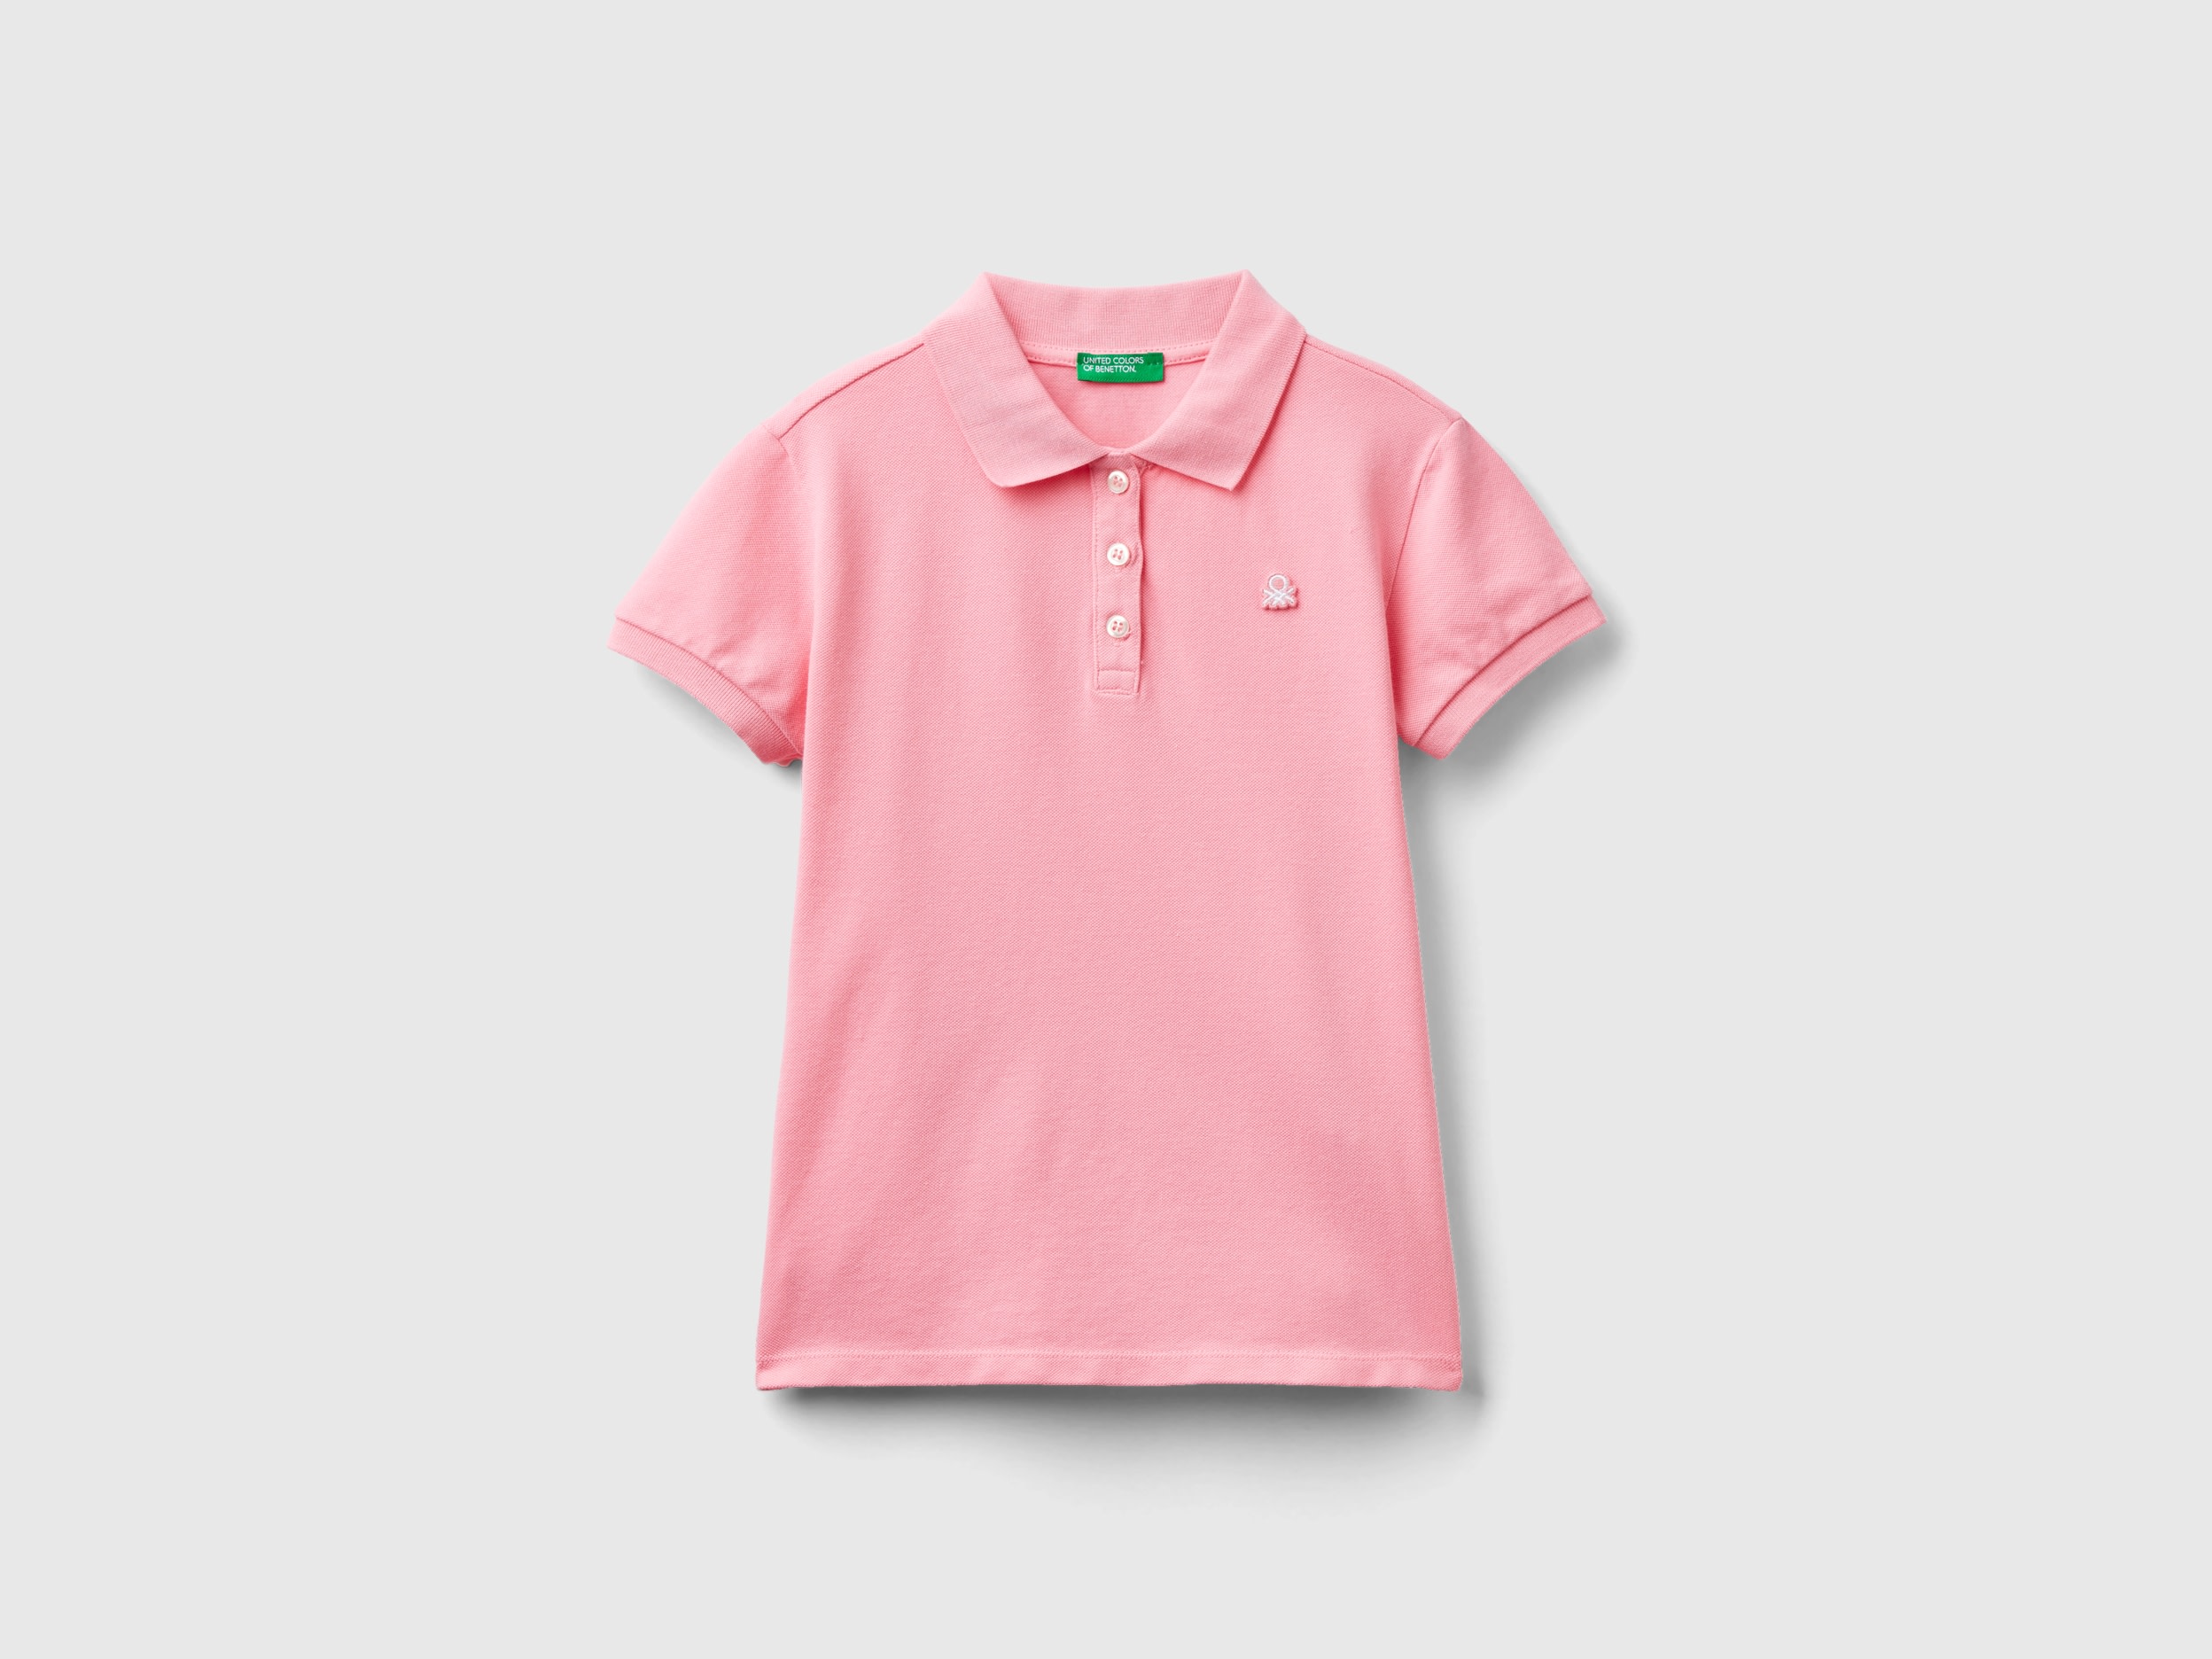 Benetton, Short Sleeve Polo In Organic Cotton, size S, Pink, Kids